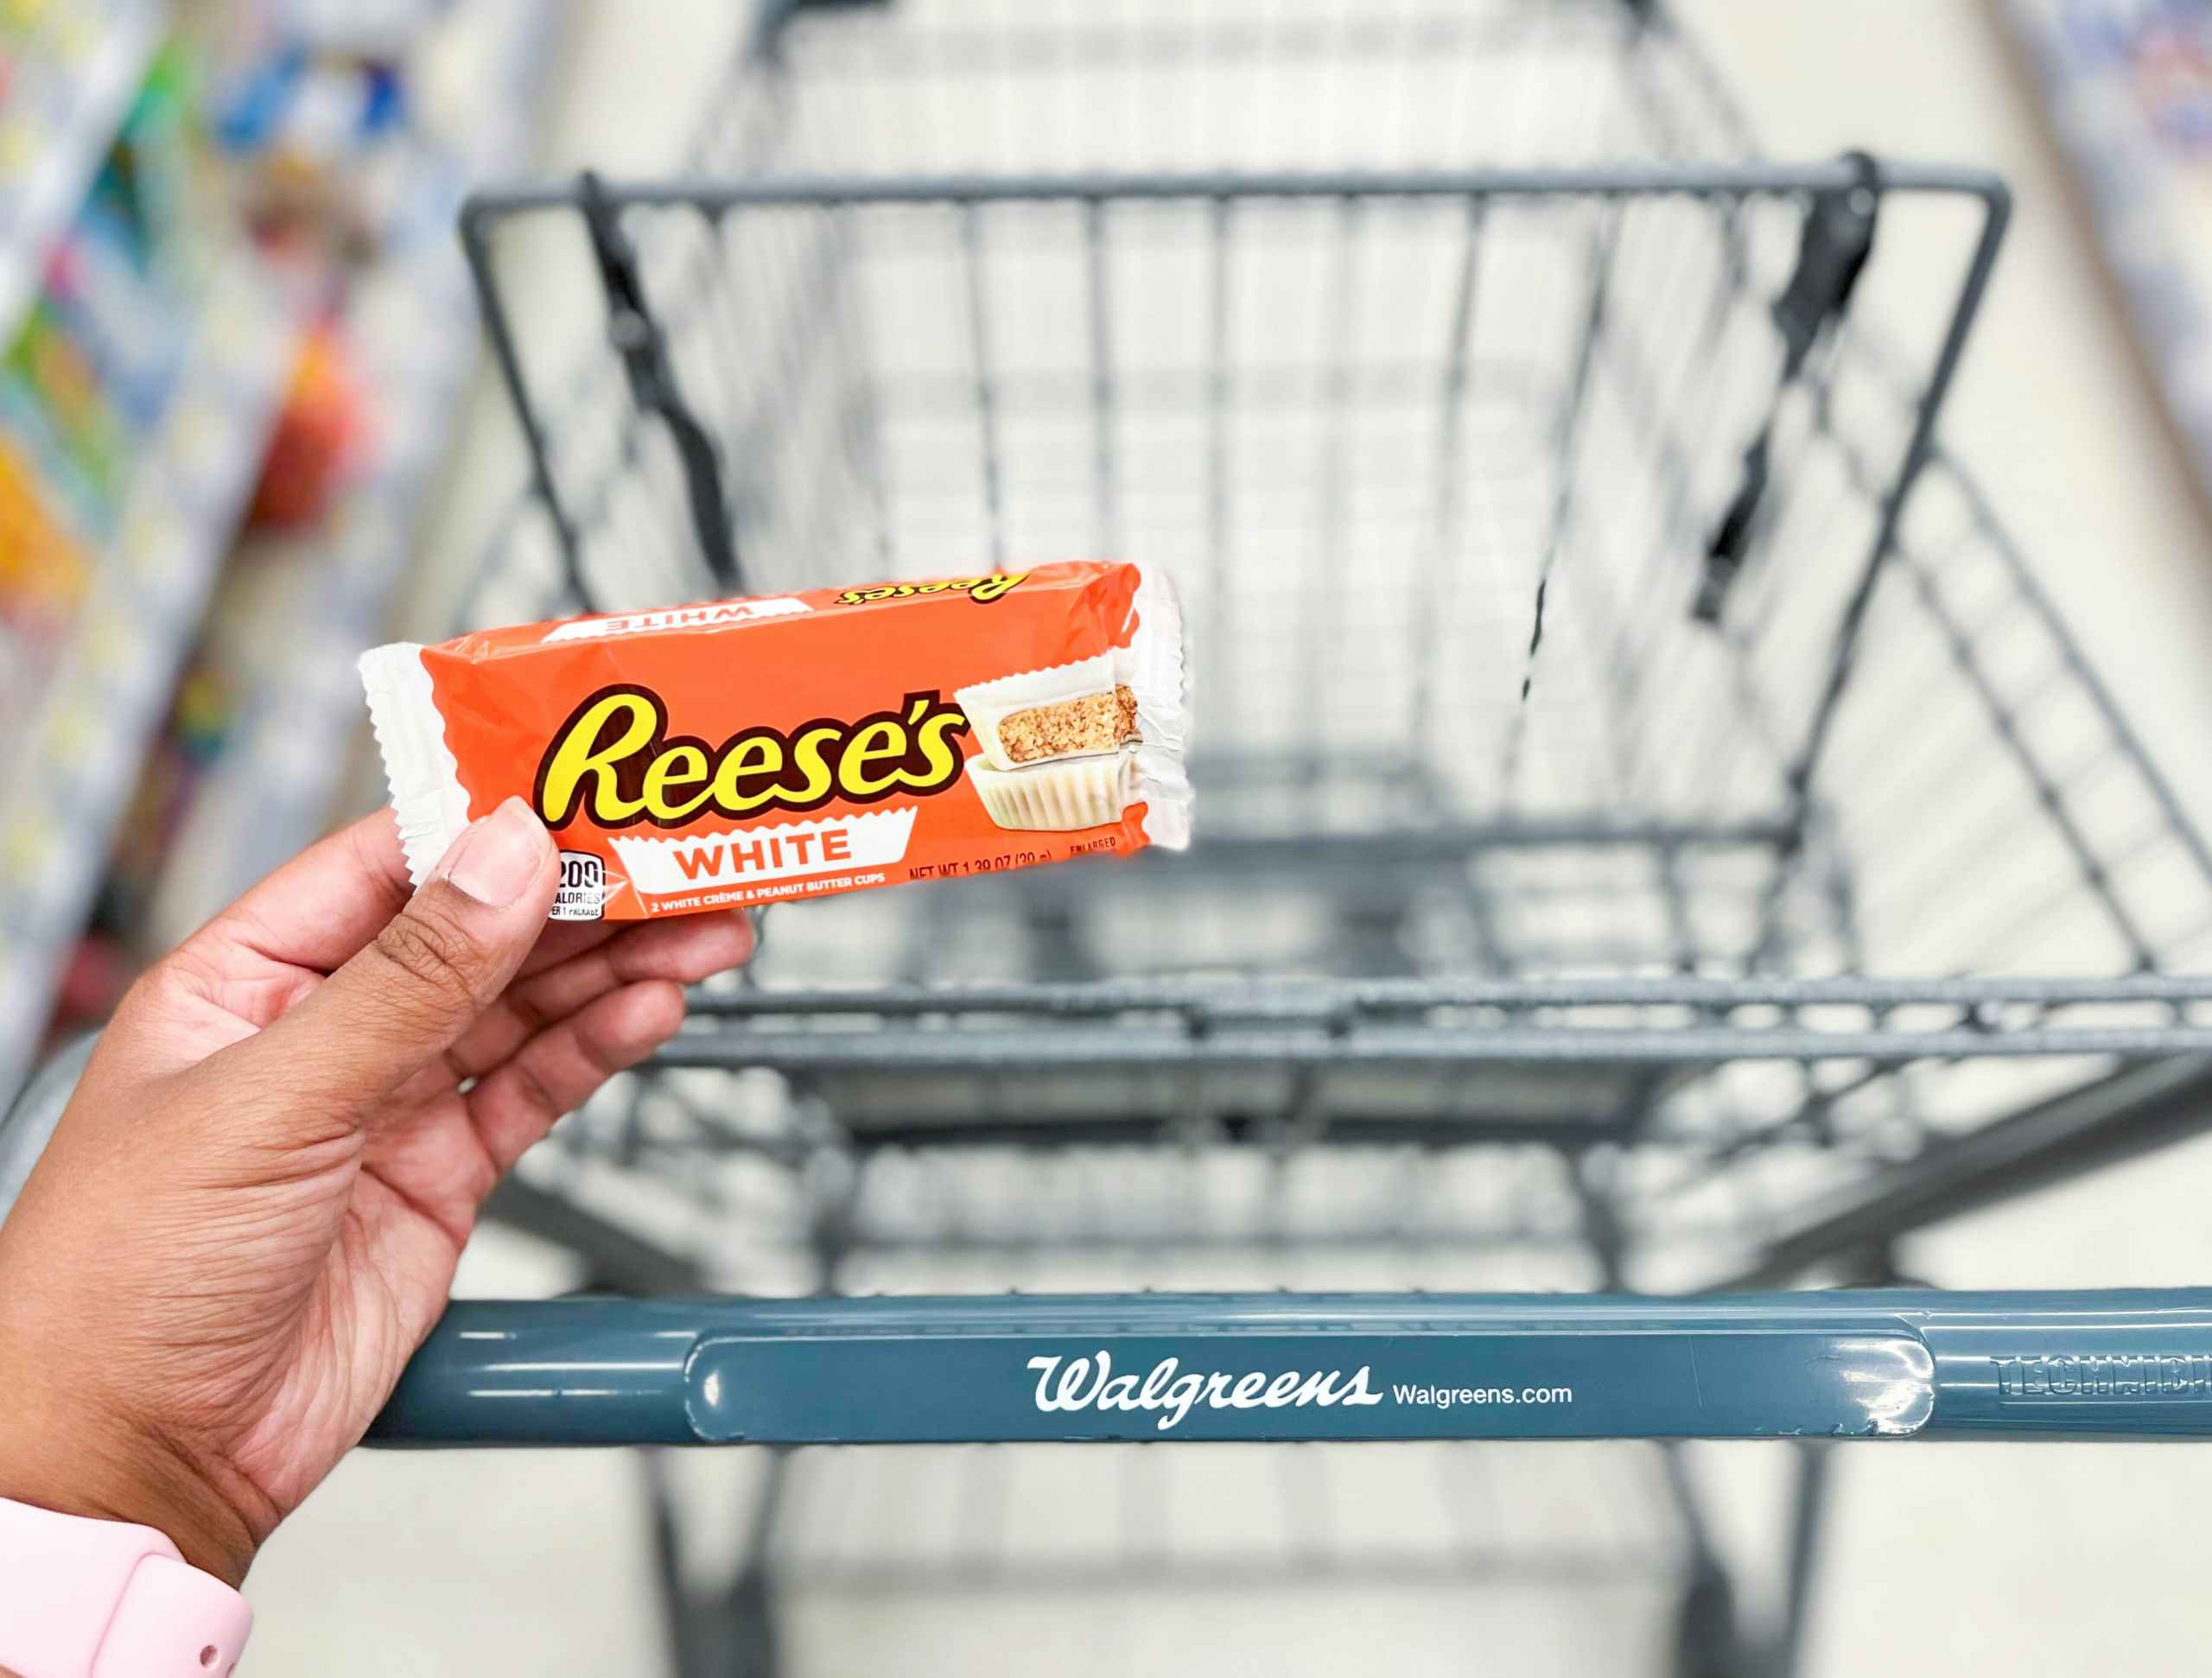 hand holding a pack of Reese's peanut butter cups in front of shopping cart